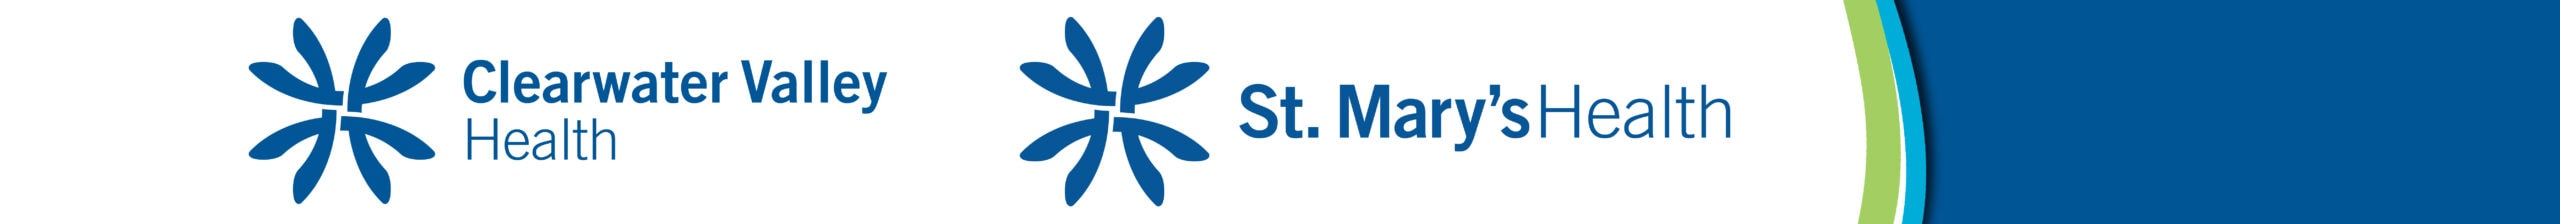 St. Mary's Health & Clearwater Valley Health Logo